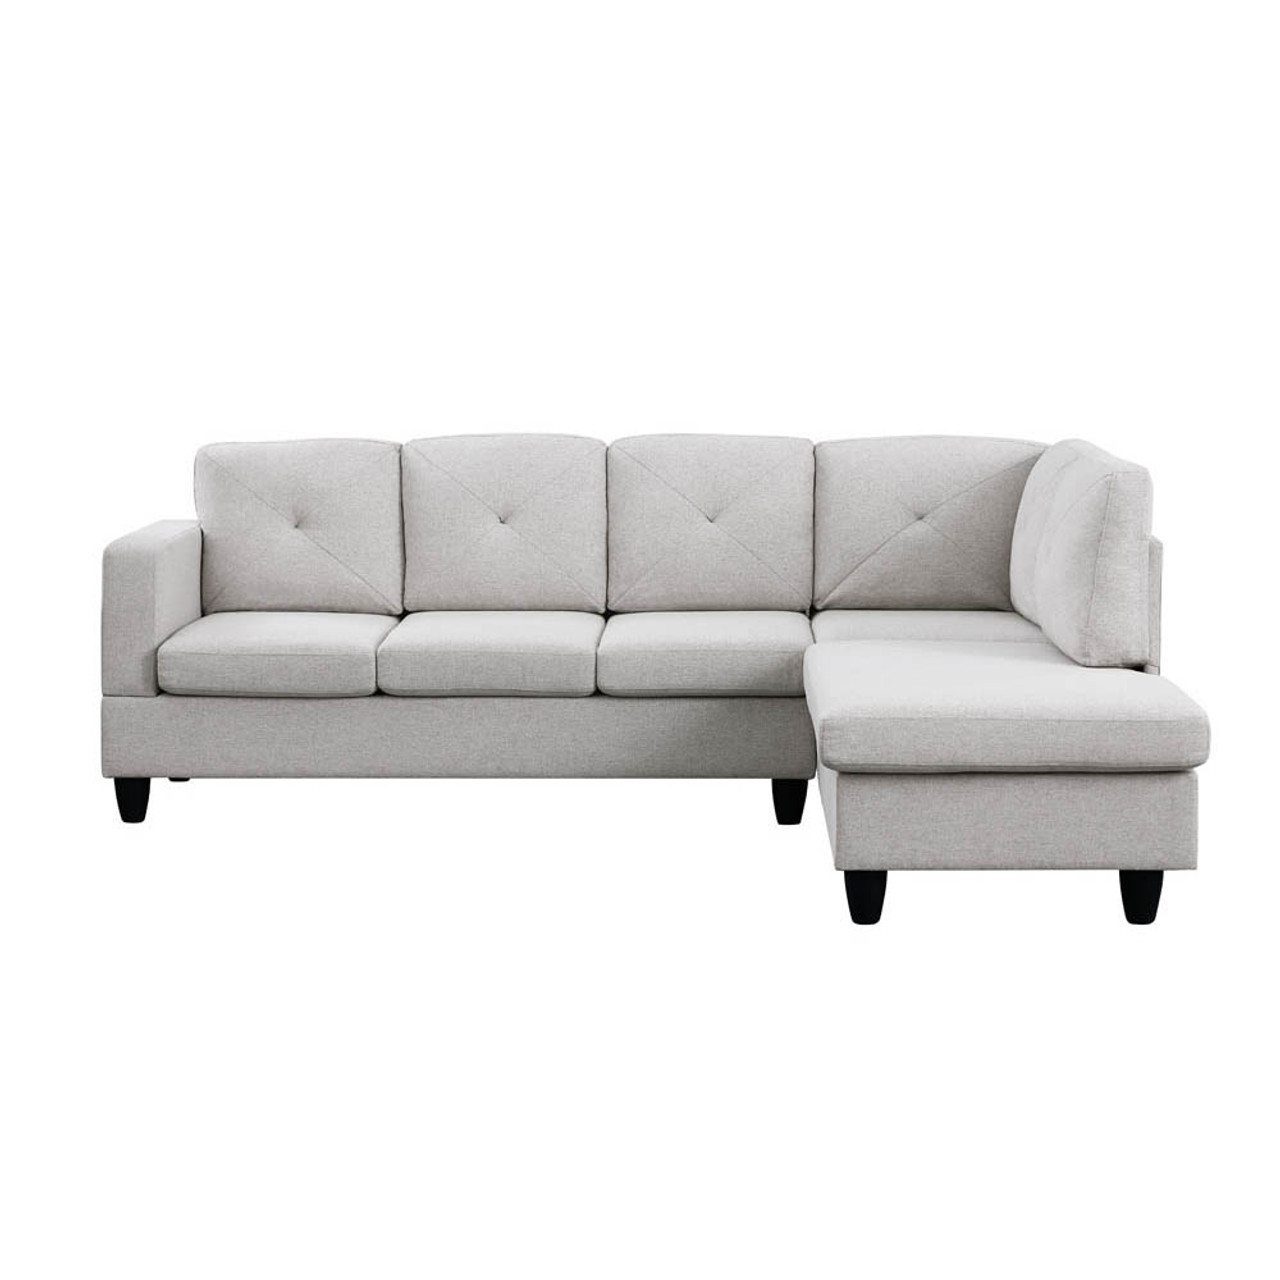 https://cdn11.bigcommerce.com/s-d9g0oj0zhx/images/stencil/1280x1280/products/54438/280818/santiago-light-gray-linen-sectional-sofa-with-right-facing-chaise-83071-4__28140.1693994457.jpg?c=2